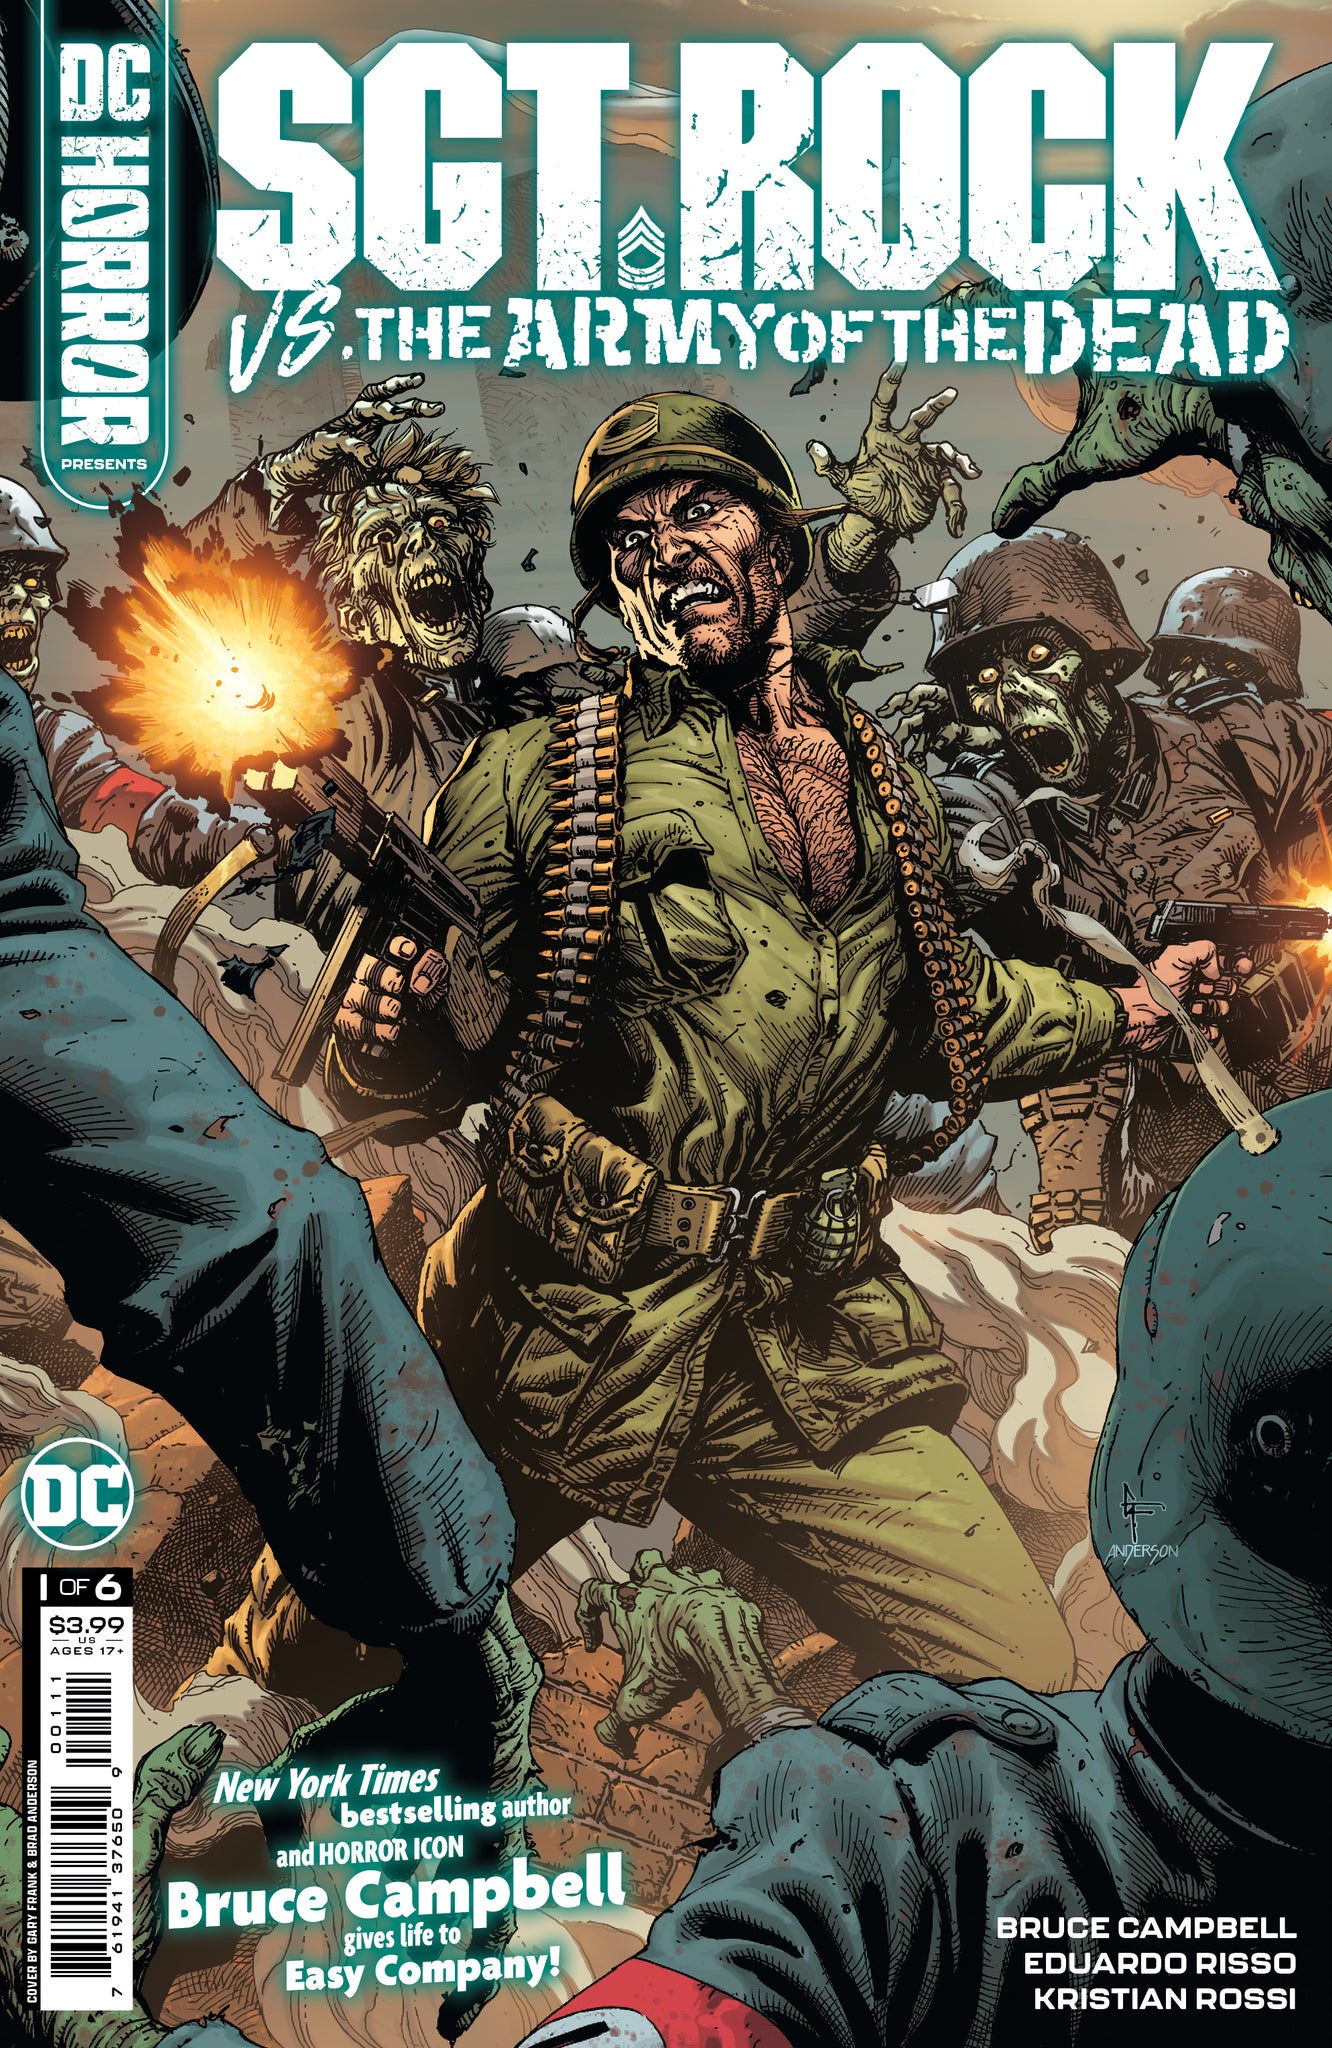 DC HORROR PRESENTS SGT ROCK VS THE ARMY OF THE DEAD #1 (OF 6)